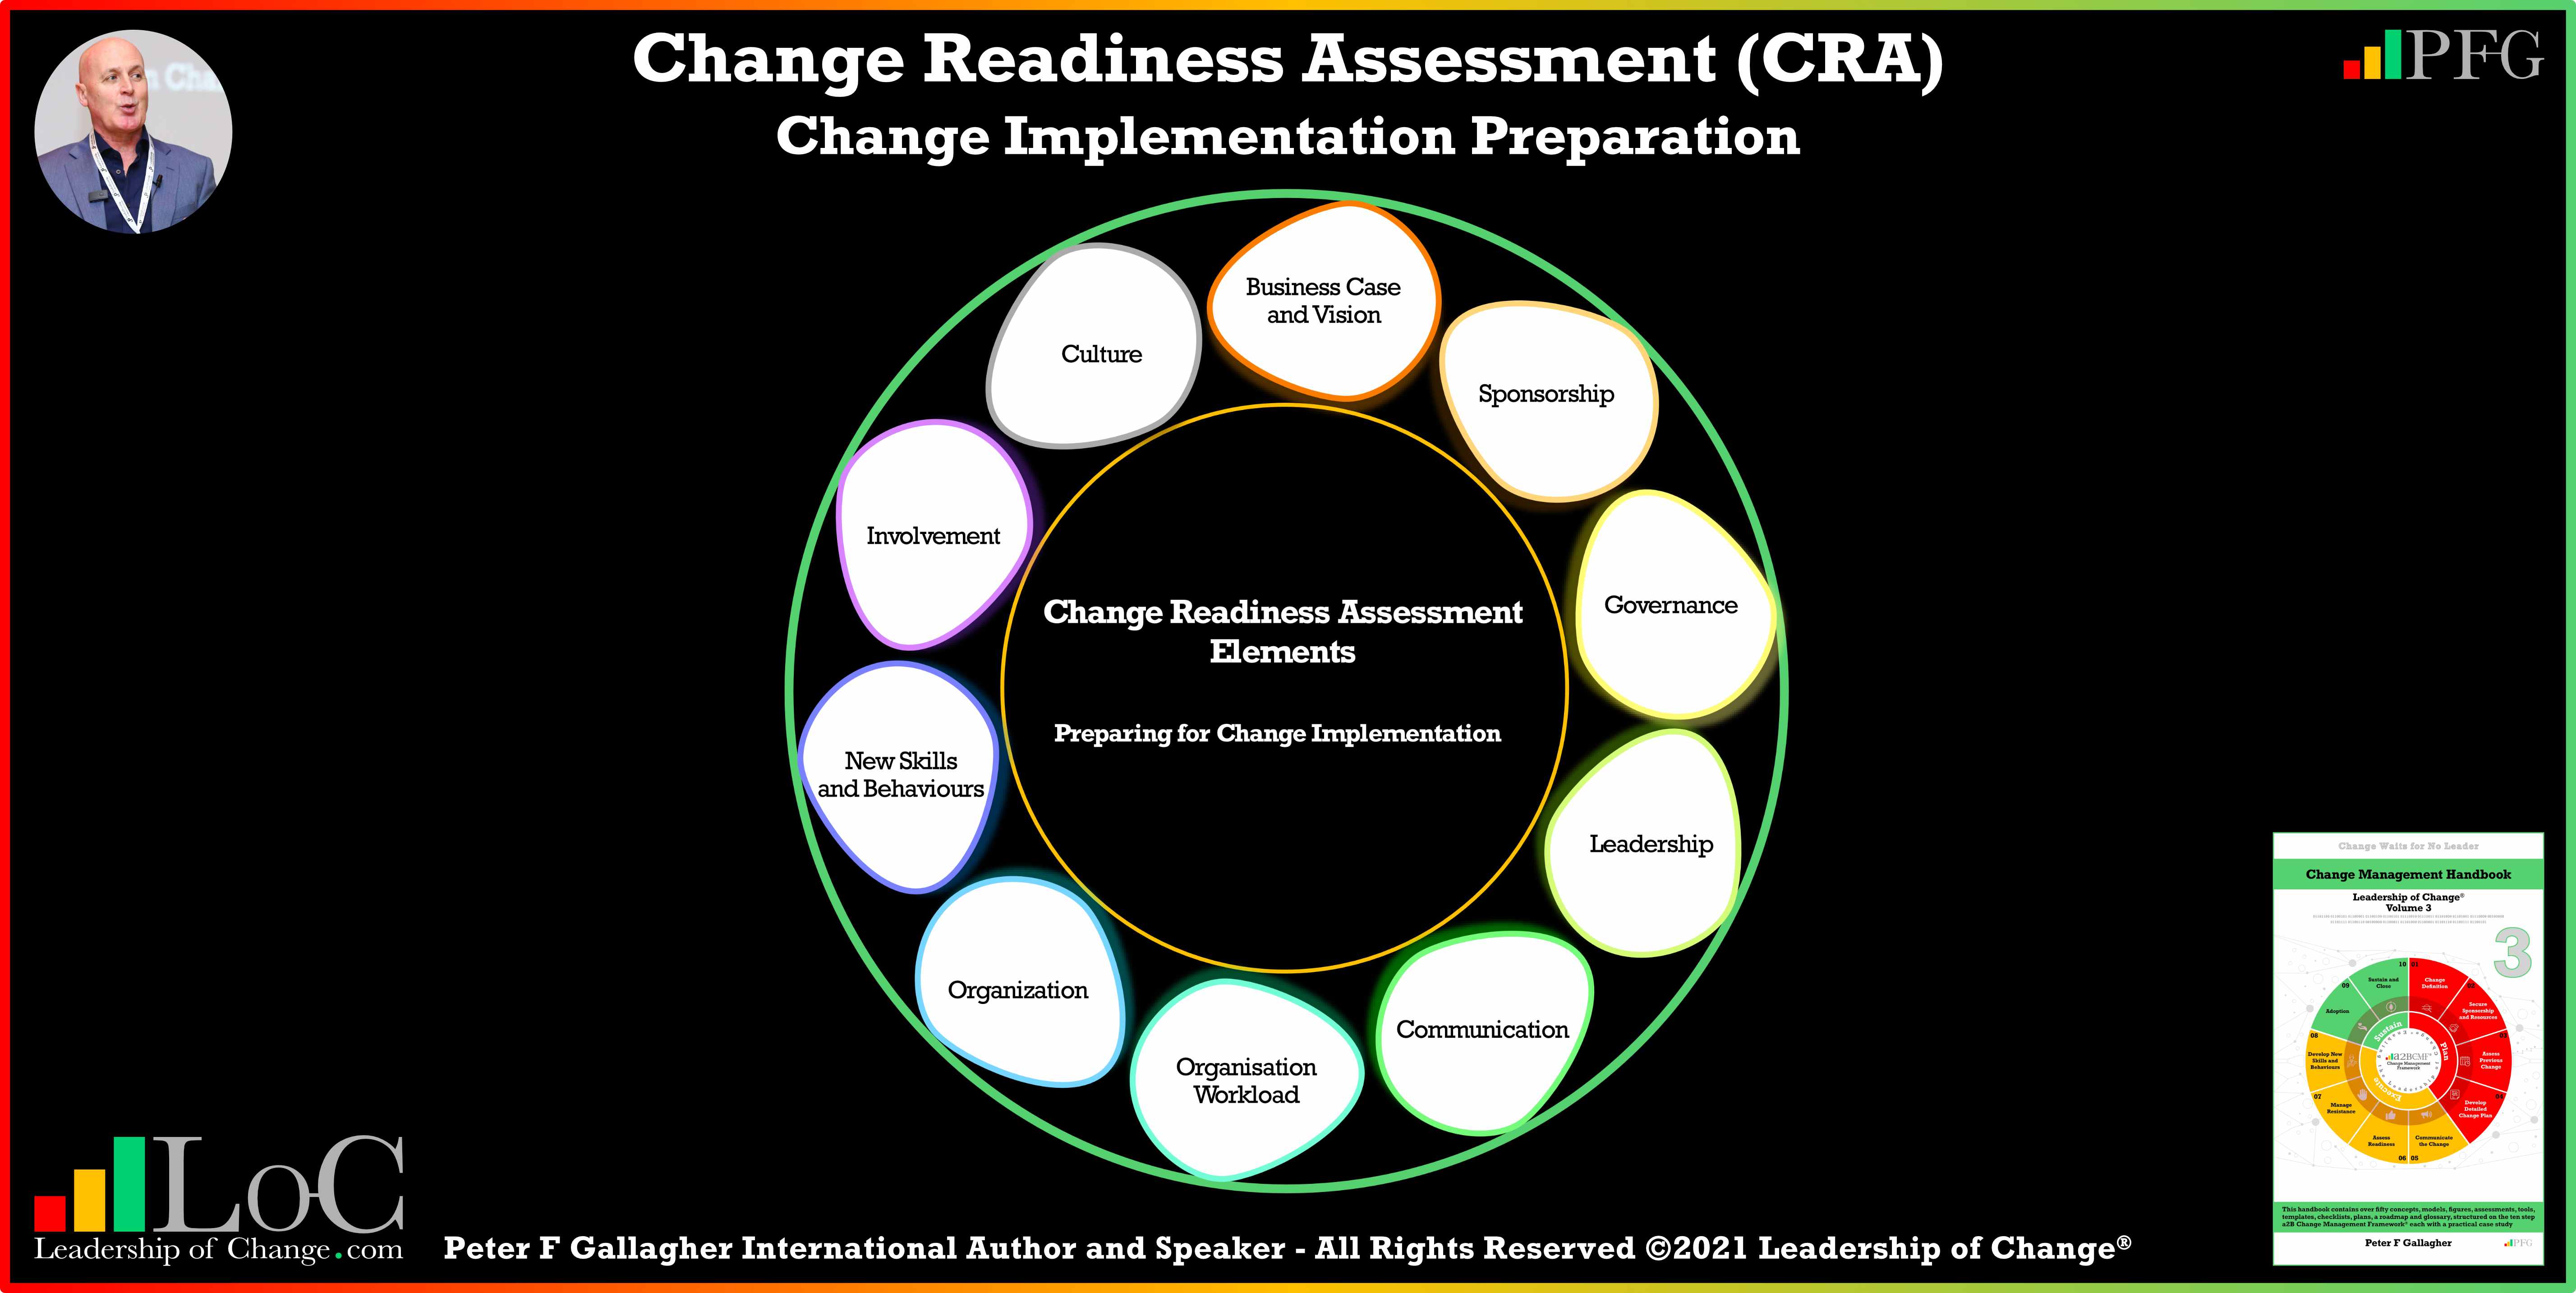 a case study on change management readiness for an oil & gas sme company in malaysia